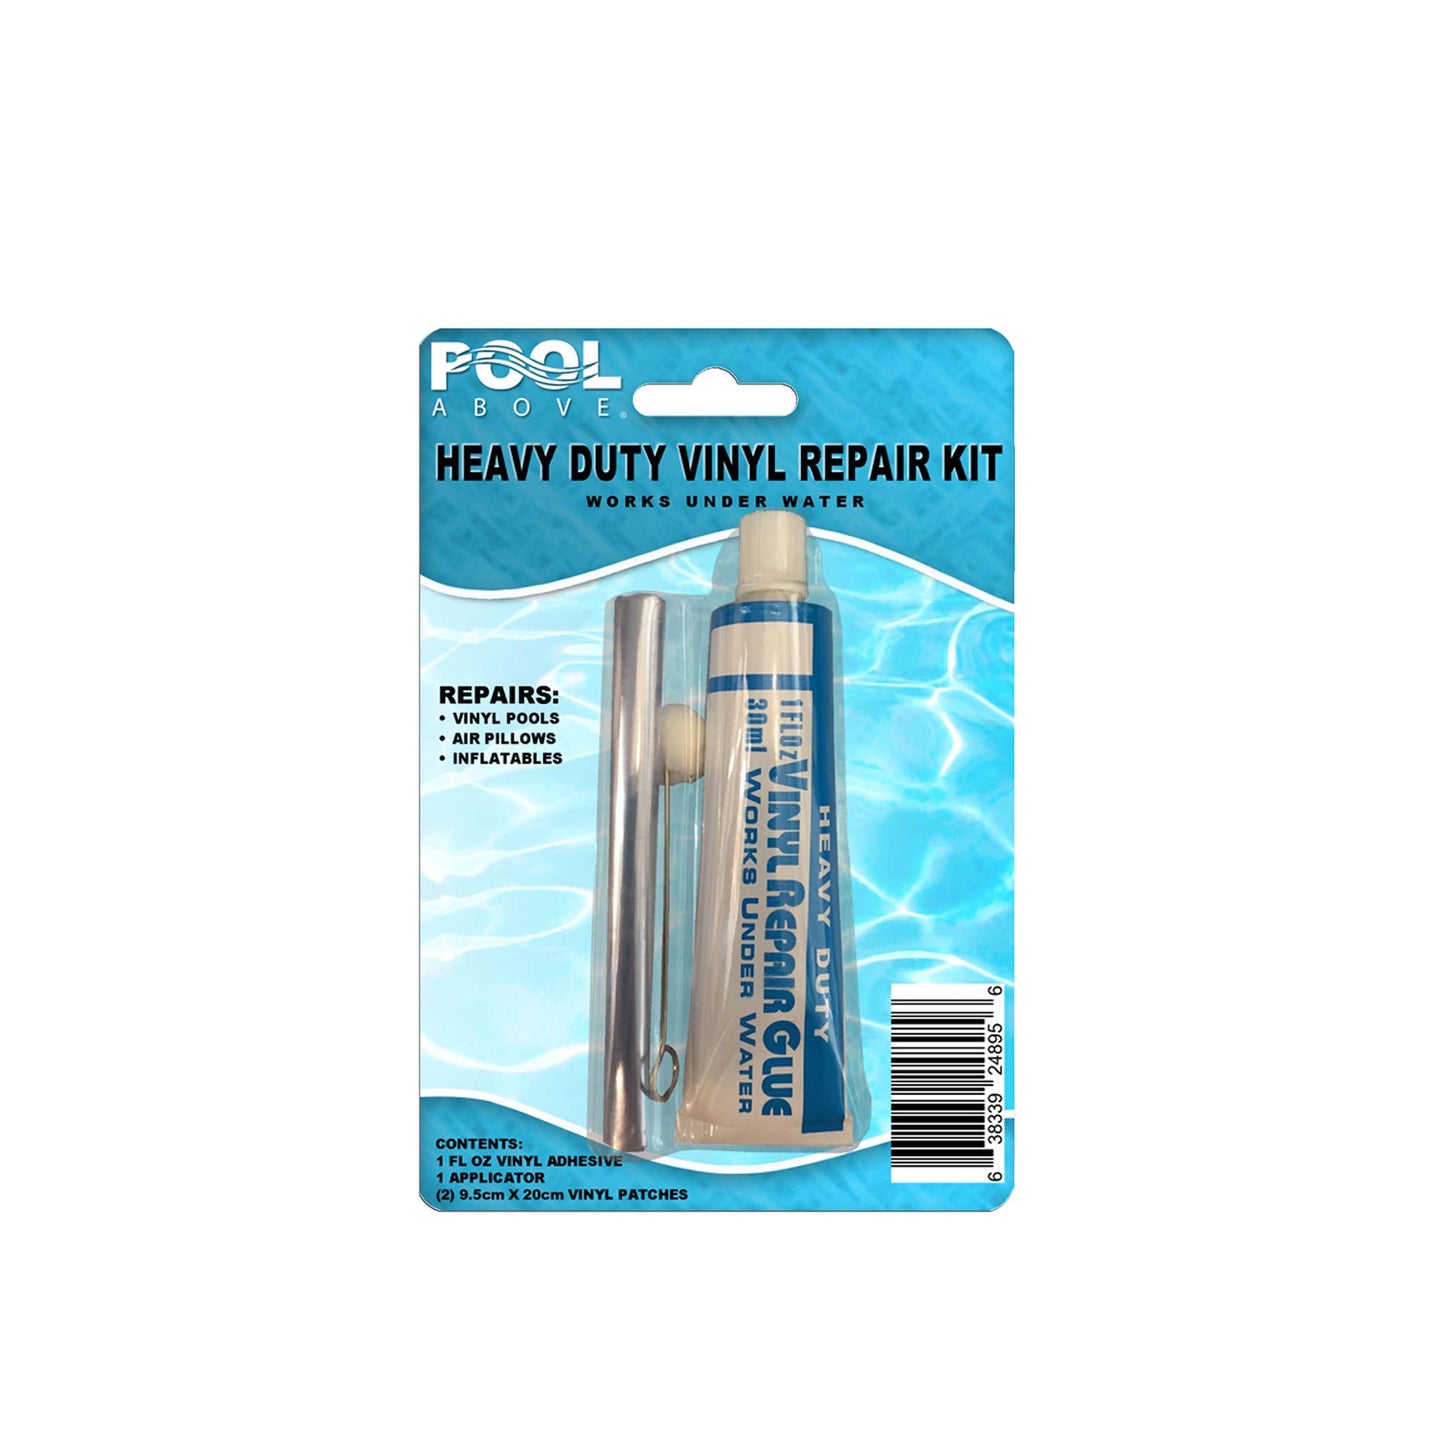 Pool Above Vinyl Repair Kit with Clear Sealant, Ideal for Inflatable Empire Chair and Other Vinyl Products, Includes Pink & Black Patches and Strong Vinyl Glue